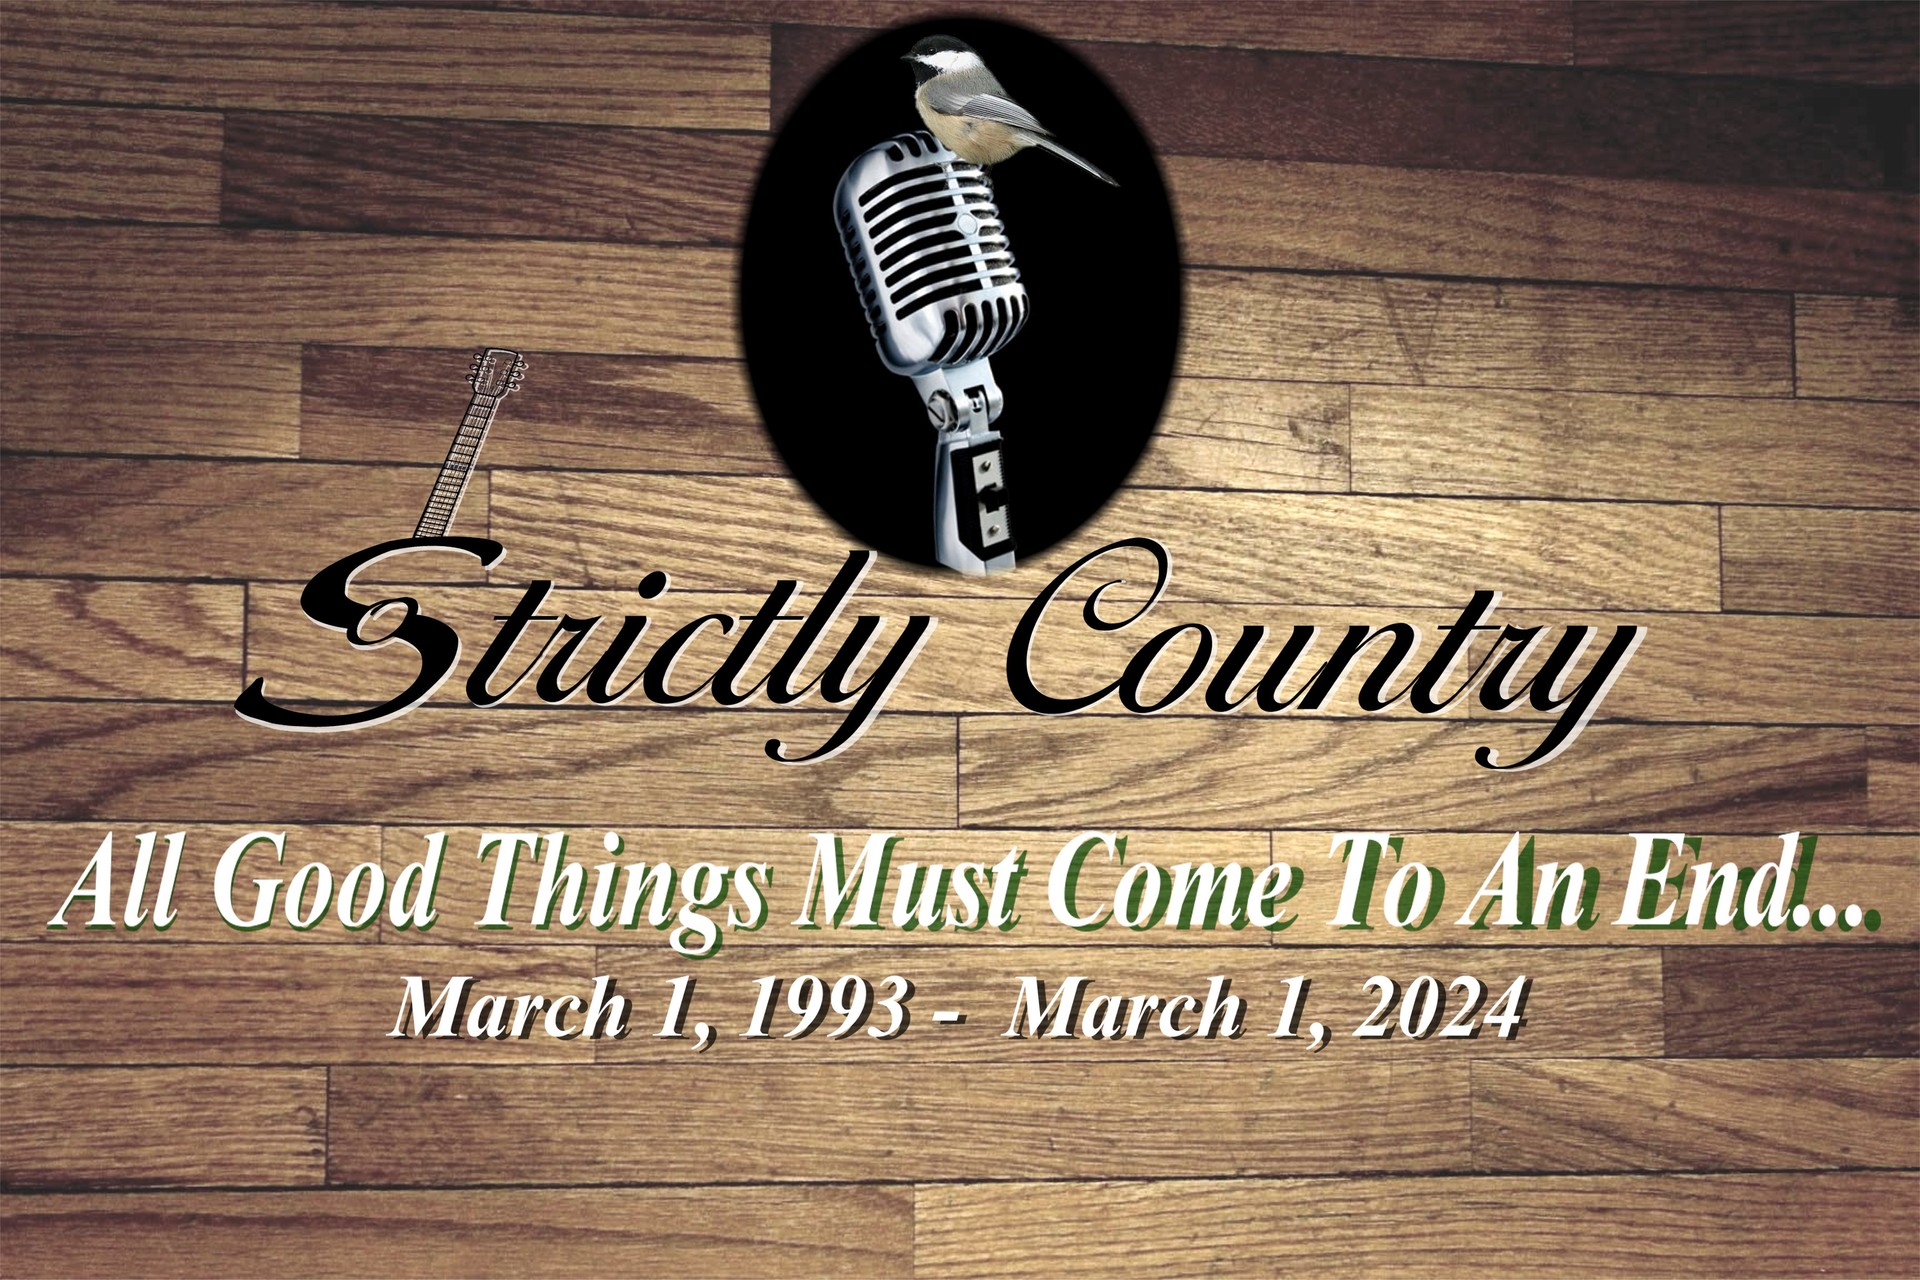 Strictly Country Magazine copyright The End